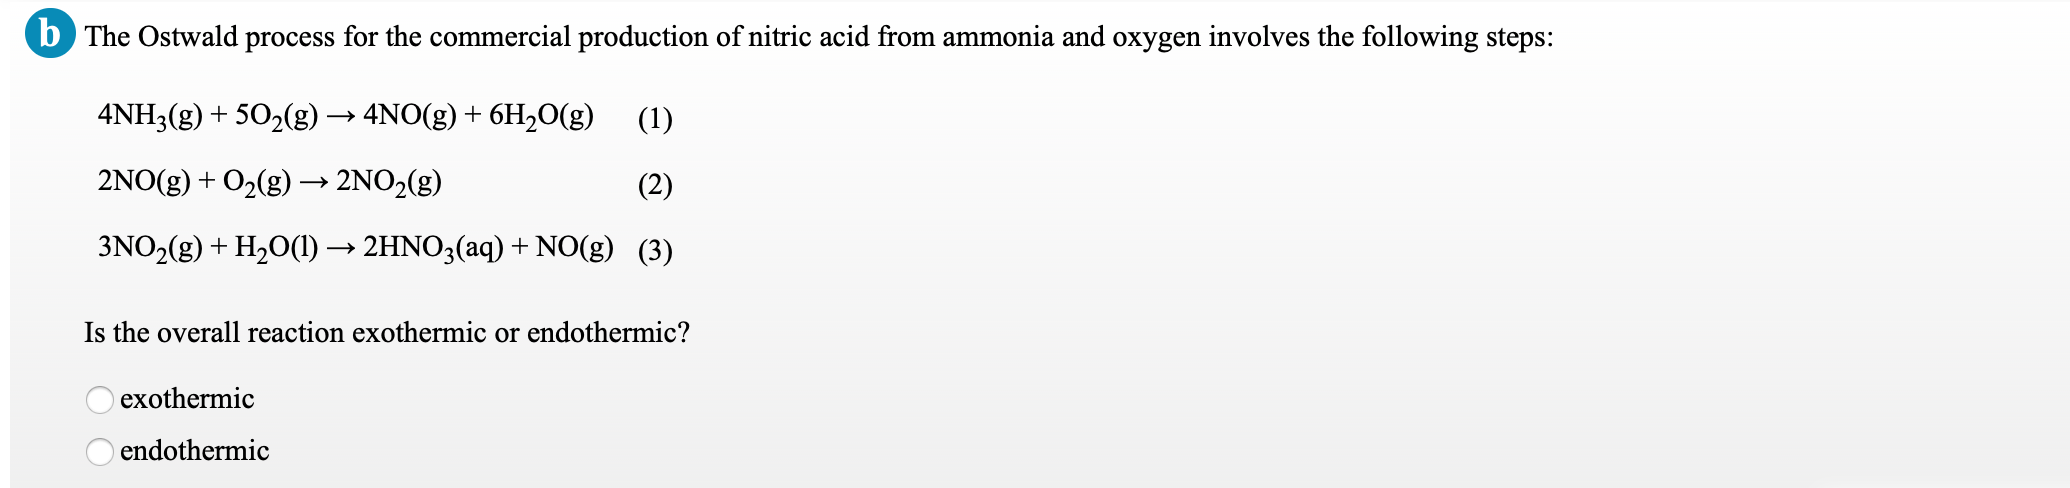 b The Ostwald process for the commercial production of nitric acid from ammonia and oxygen involves the following steps:
4NH3(g) + 502(g) → 4NO(g) + 6H,O(g) (1)
2NO(g) + O2(g) → 2NO2(g)
(2)
3NO2(g) + H20(1) → 2HNO3(aq) + NO(g) (3)
Is the overall reaction exothermic or endothermic?
exothermic
endothermic
